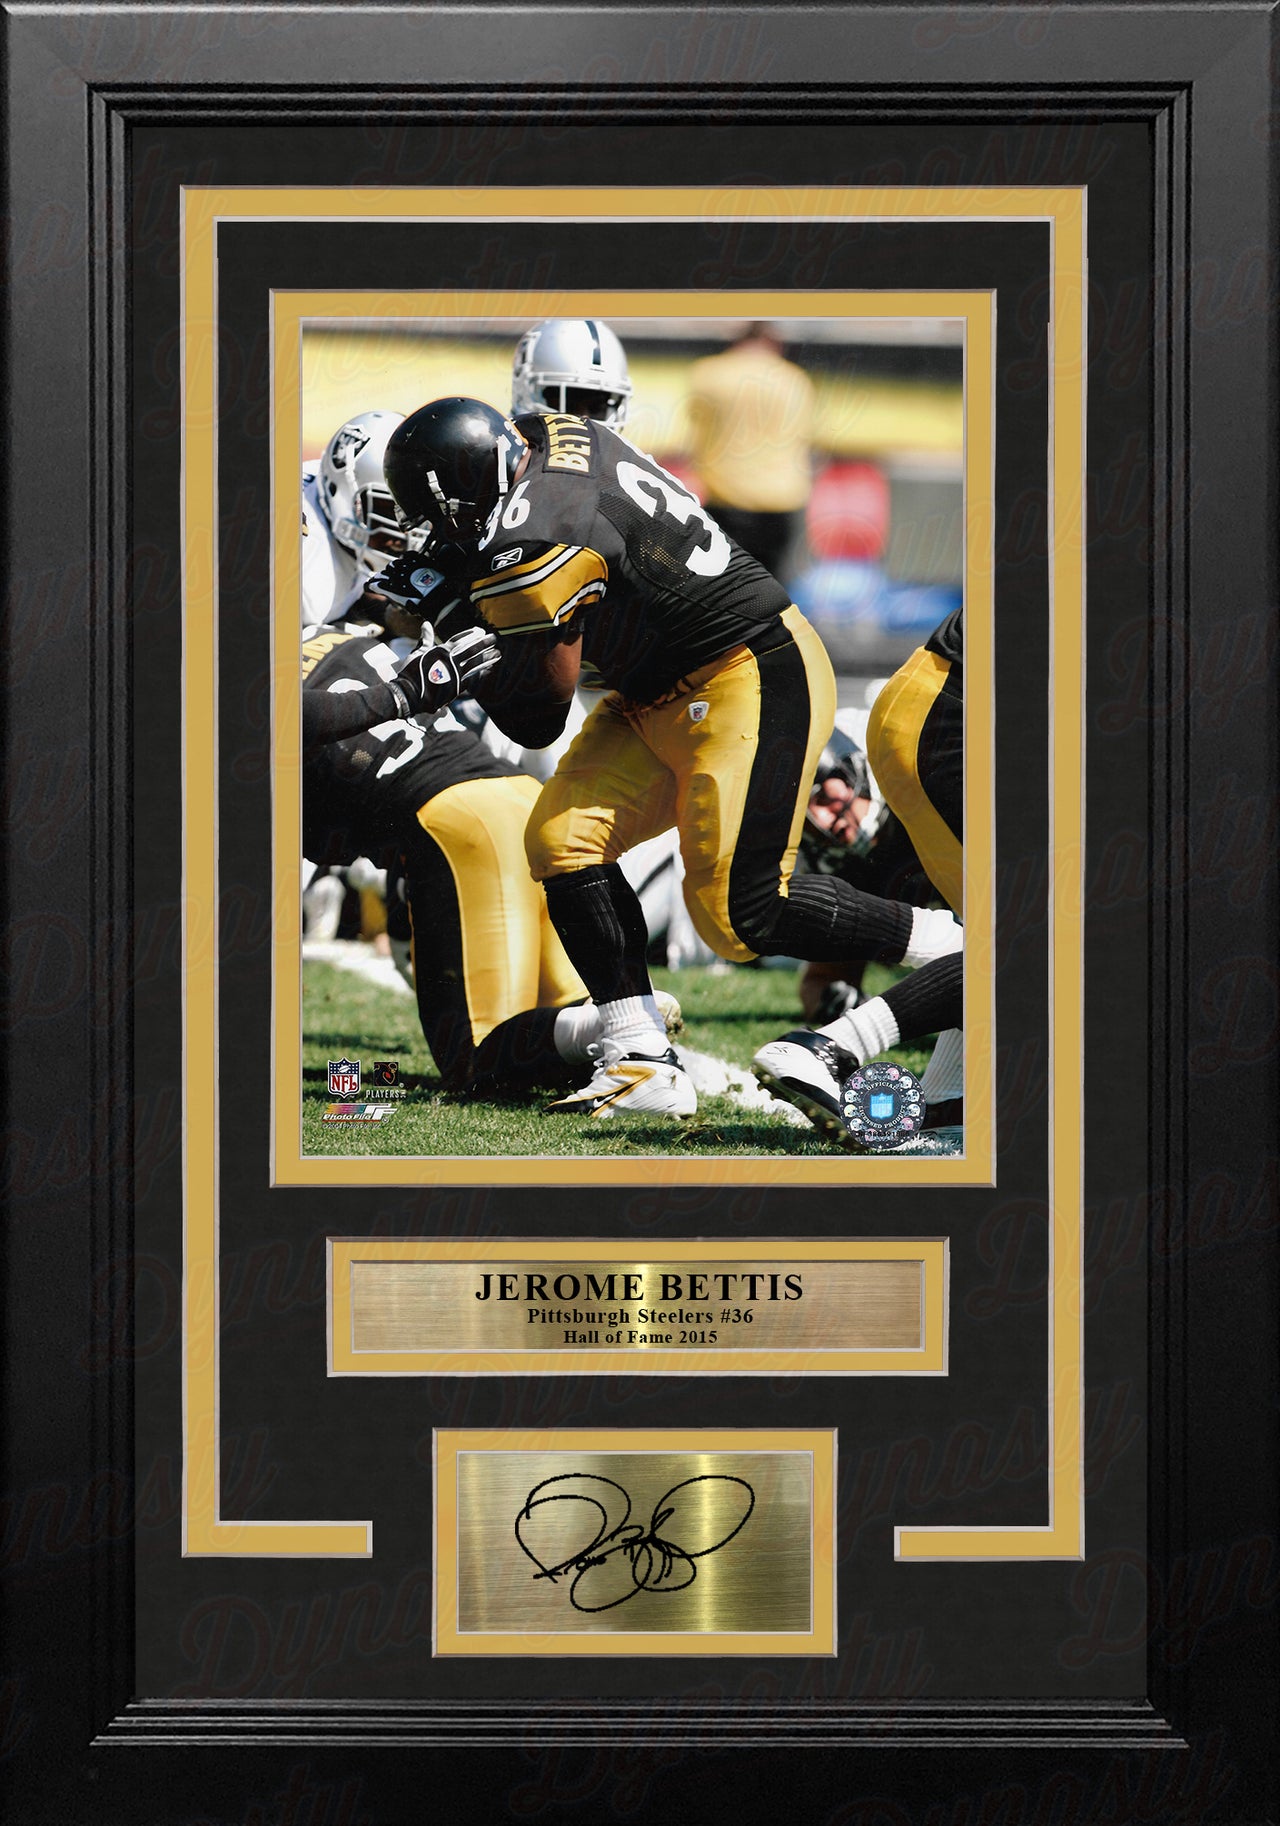 Jerome Bettis in Action Pittsburgh Steelers 8" x 10" Framed Football Photo with Engraved Autograph - Dynasty Sports & Framing 